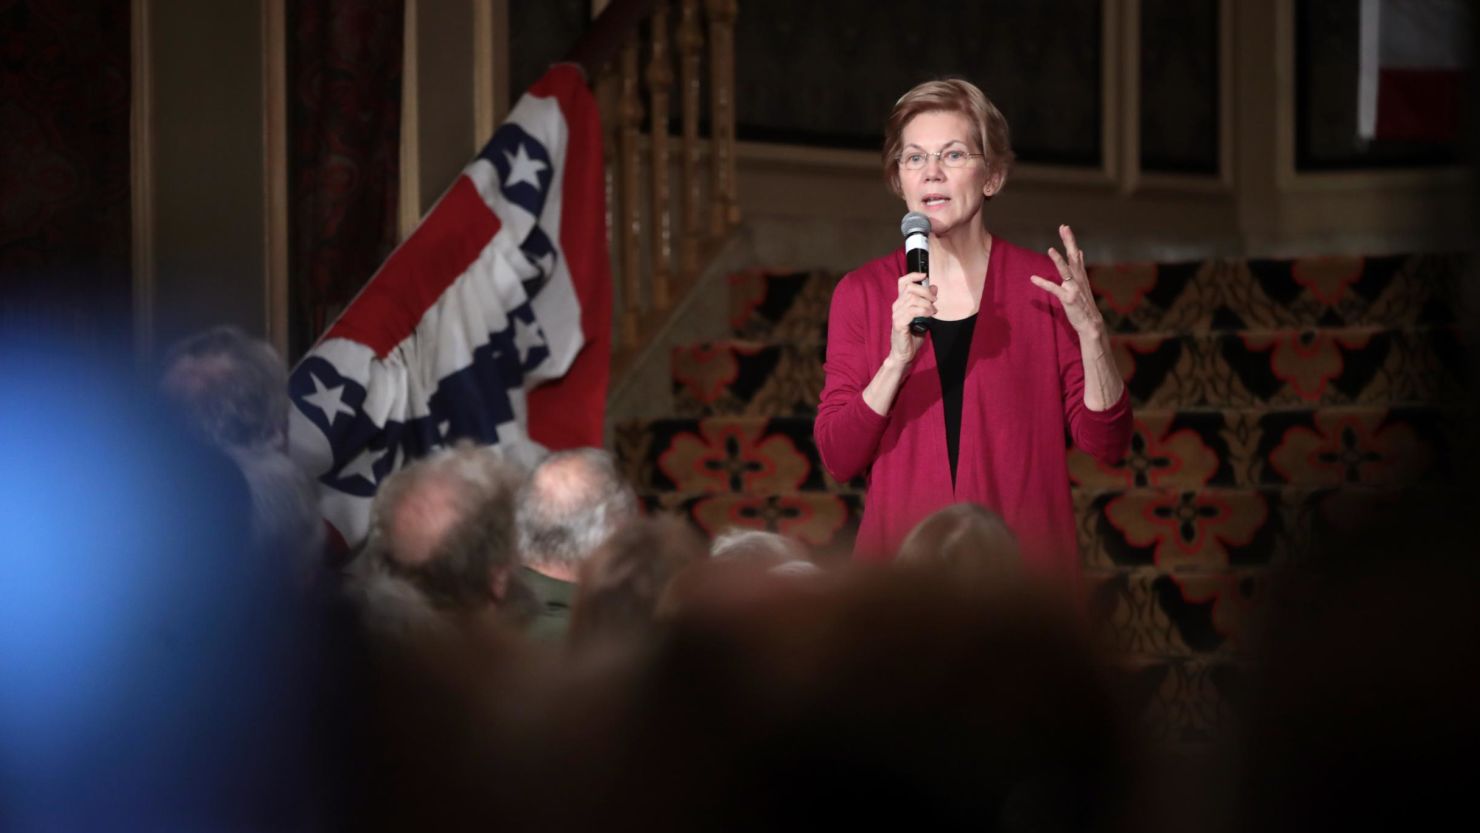 SIOUX CITY, IOWA - JANUARY 05: Sen. Elizabeth Warren (D-MA) speaks to guests during an organizing event at the Orpheum Theater on January 5, 2019 in Sioux City, Iowa. Warren announced on December 31 that she was forming an exploratory committee for the 2020 presidential race.  (Photo by Scott Olson/Getty Images)